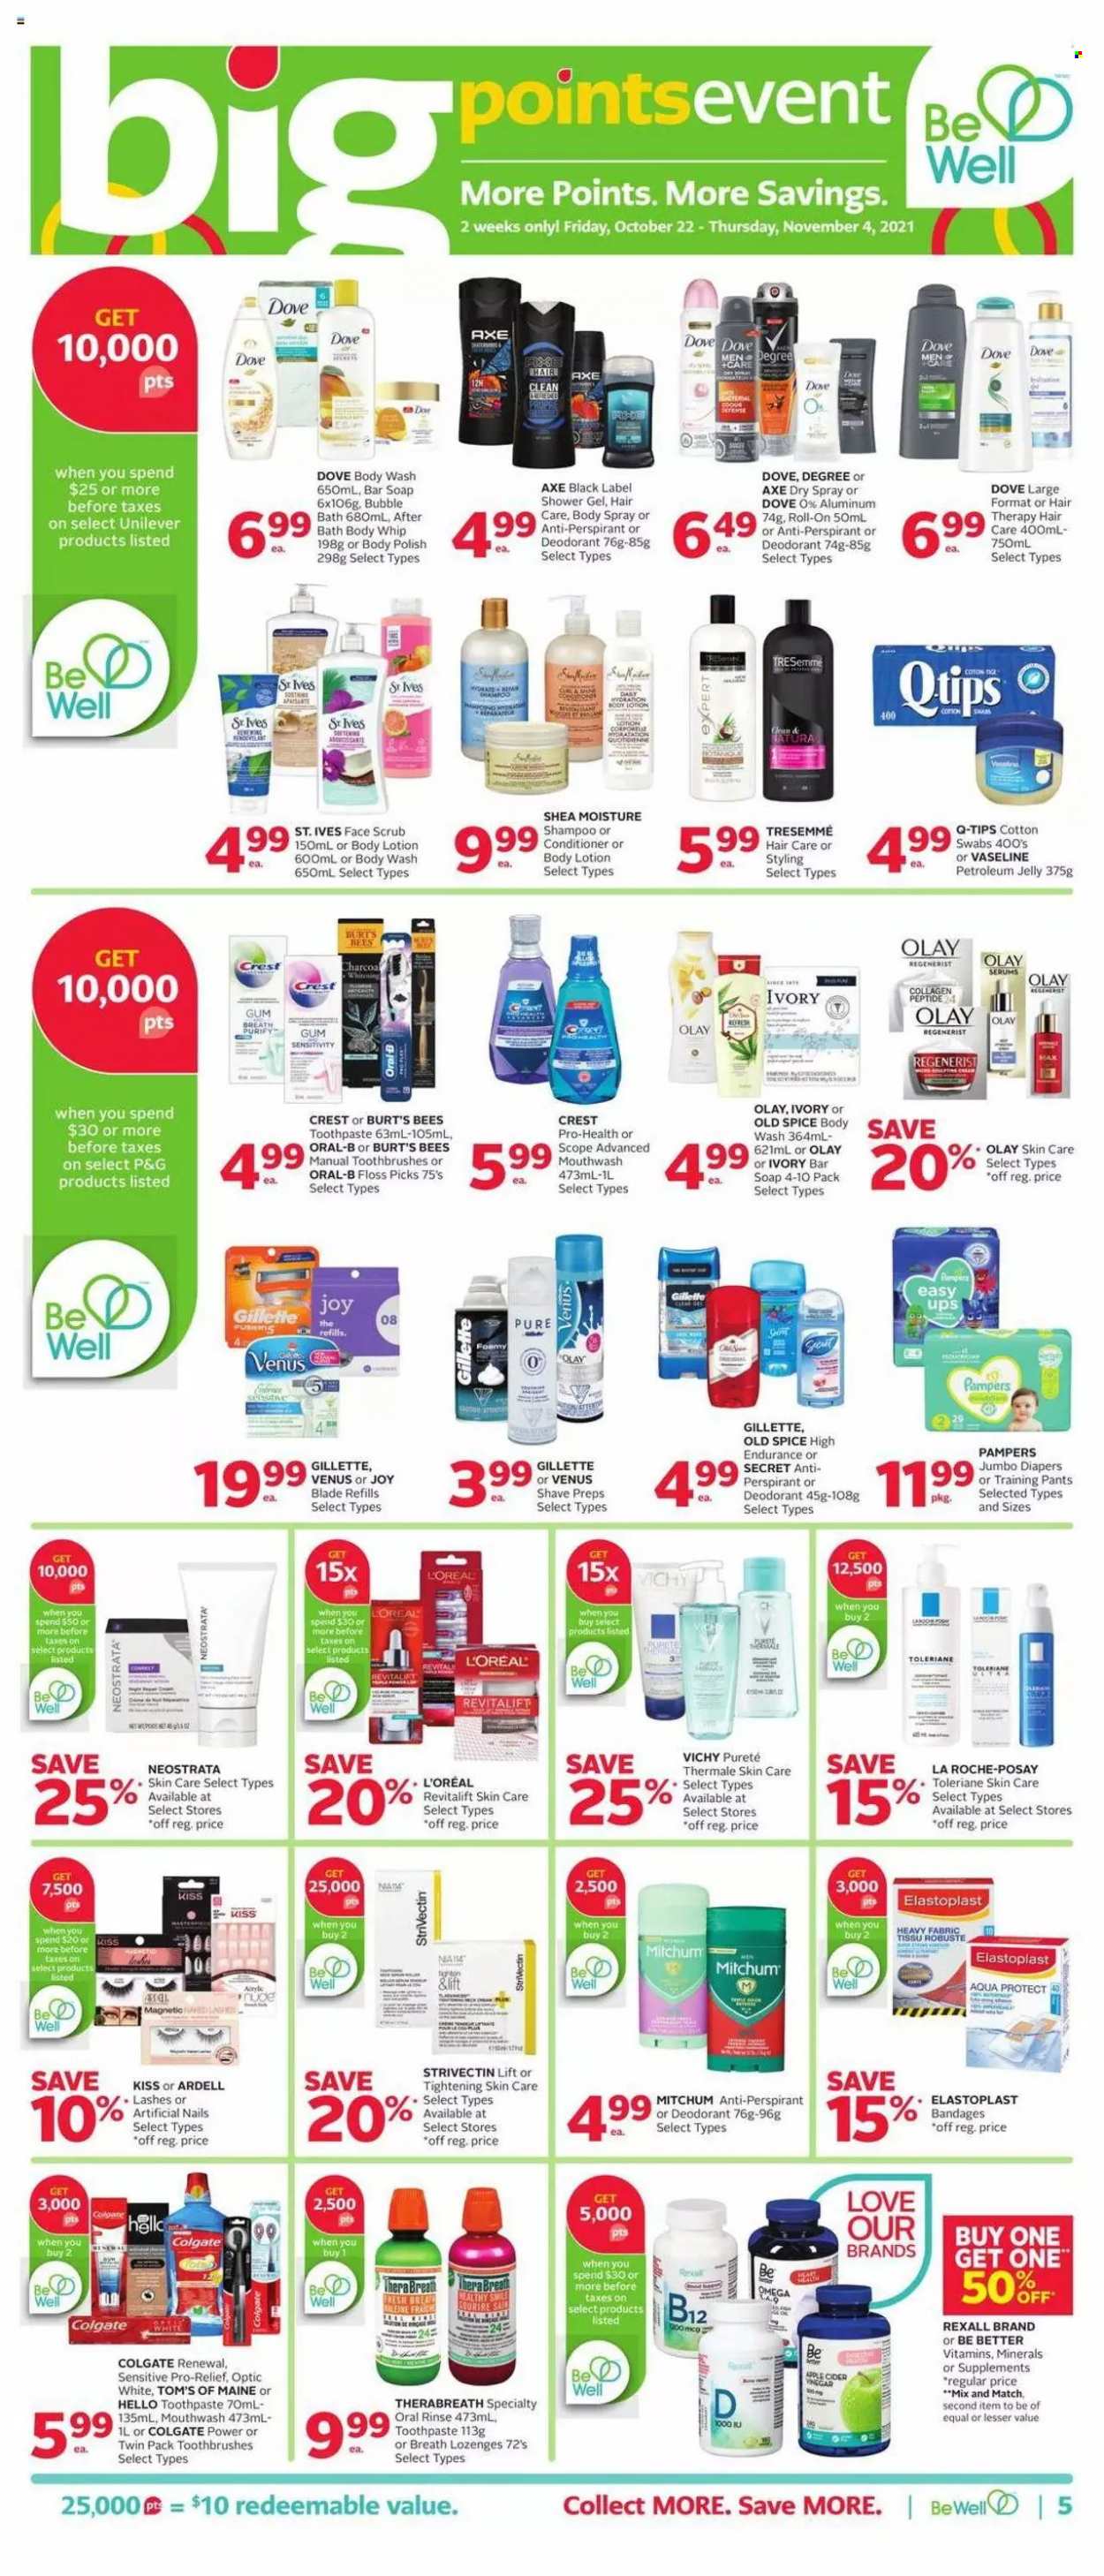 thumbnail - Rexall Flyer - October 22, 2021 - October 28, 2021 - Sales products - spice, cider, pants, nappies, baby pants, petroleum jelly, Joy, body wash, bubble bath, shower gel, Vichy, Vaseline, soap bar, soap, toothpaste, mouthwash, Crest, L’Oréal, La Roche-Posay, Olay, conditioner, TRESemmé, body lotion, body spray, anti-perspirant, roll-on, Venus, polish, Dove, Colgate, Gillette, shampoo, Pampers, Old Spice, Oral-B, deodorant. Page 5.